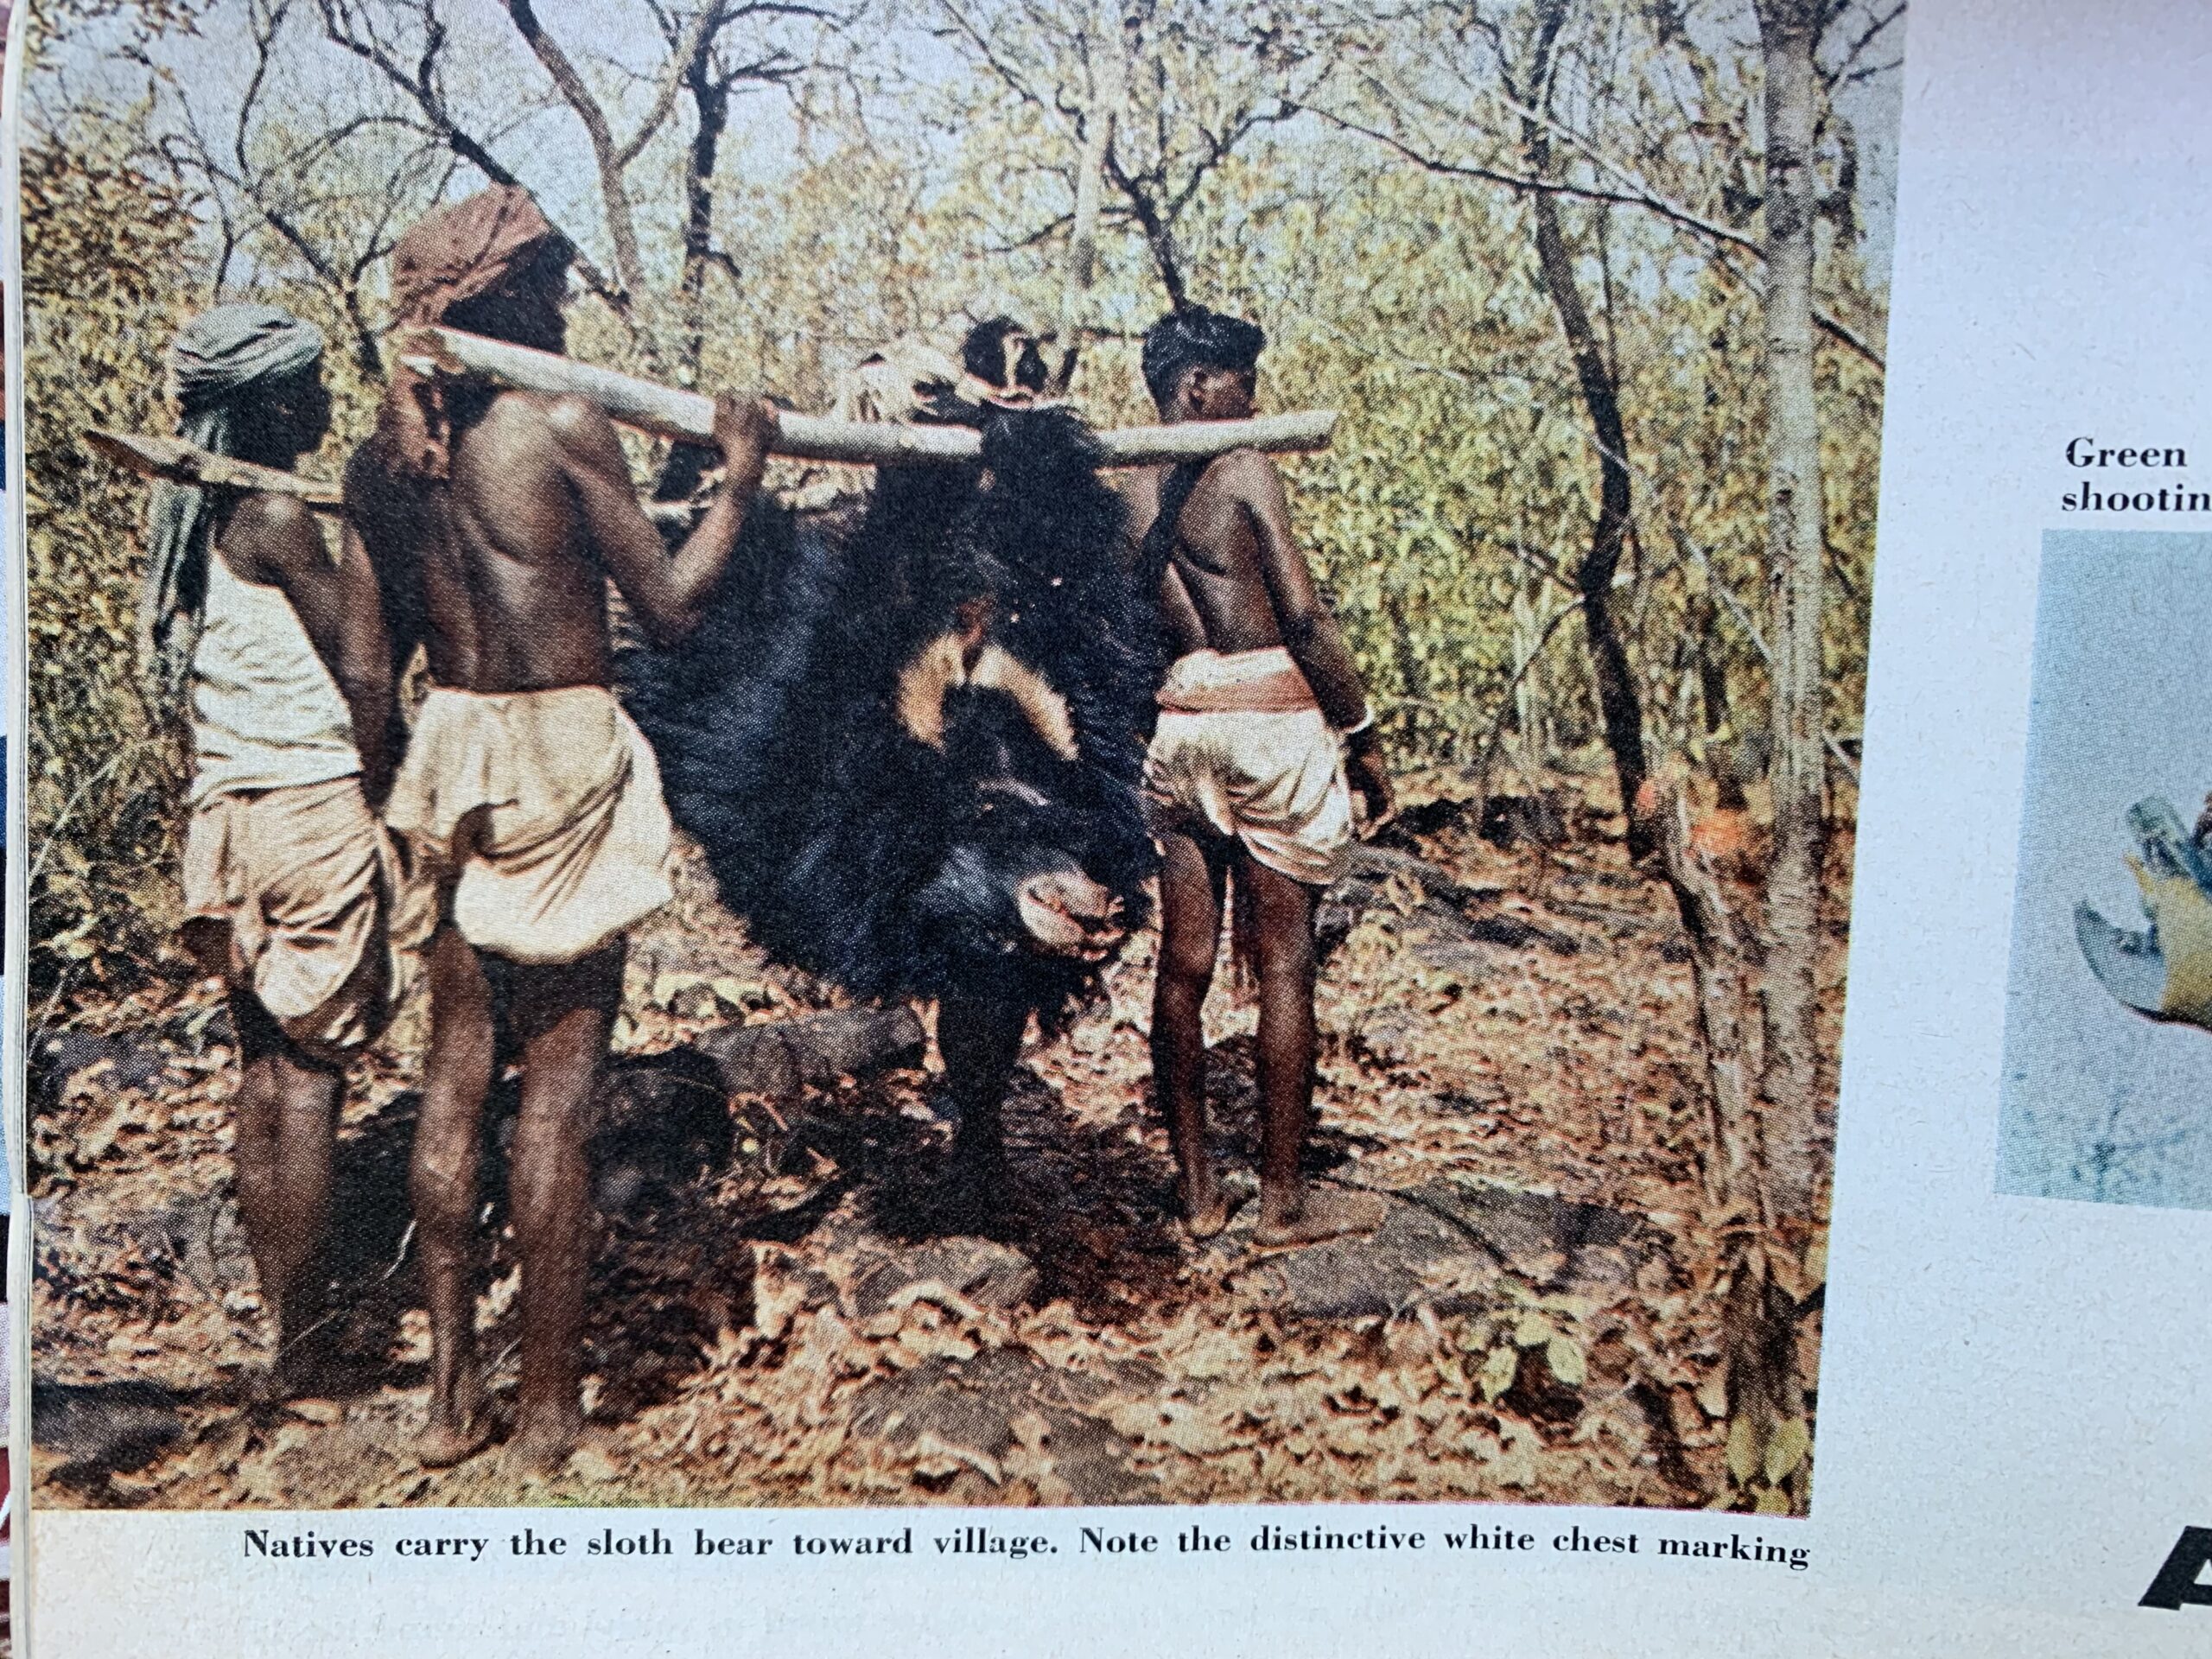 villagers carry out the killer sloth bear